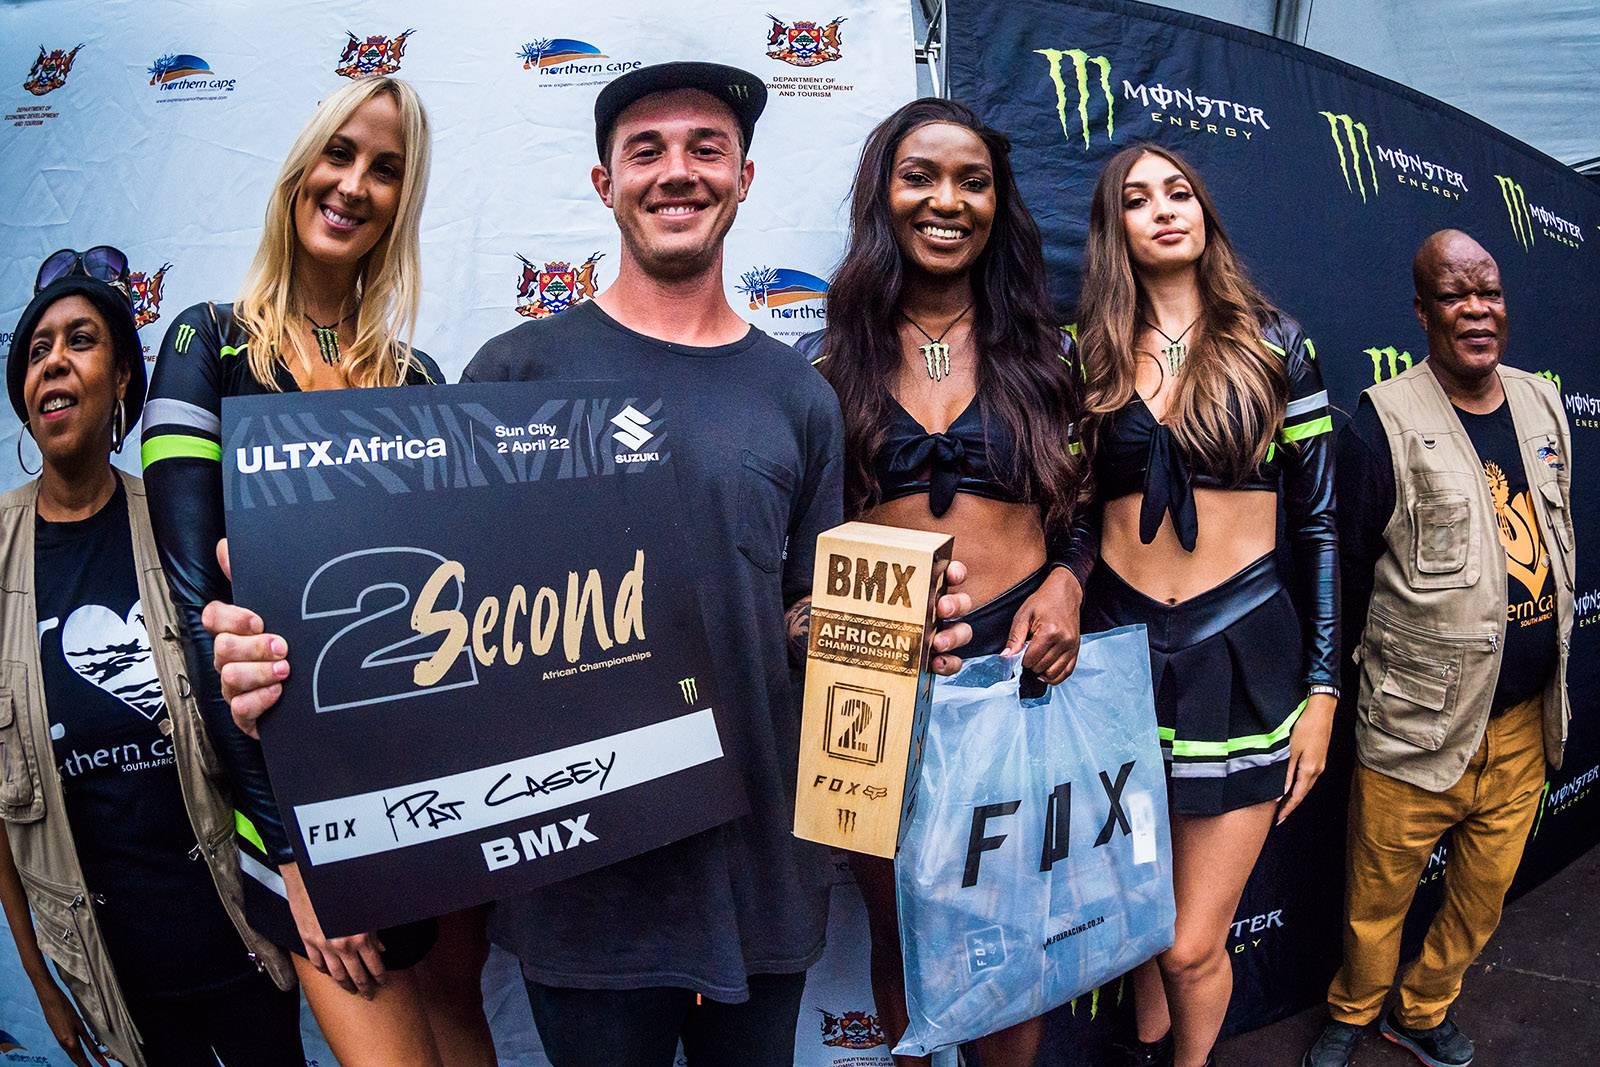 Monster Energy’s Pat Casey Takes Second Place in ULT.X BMX Championship in South Africa